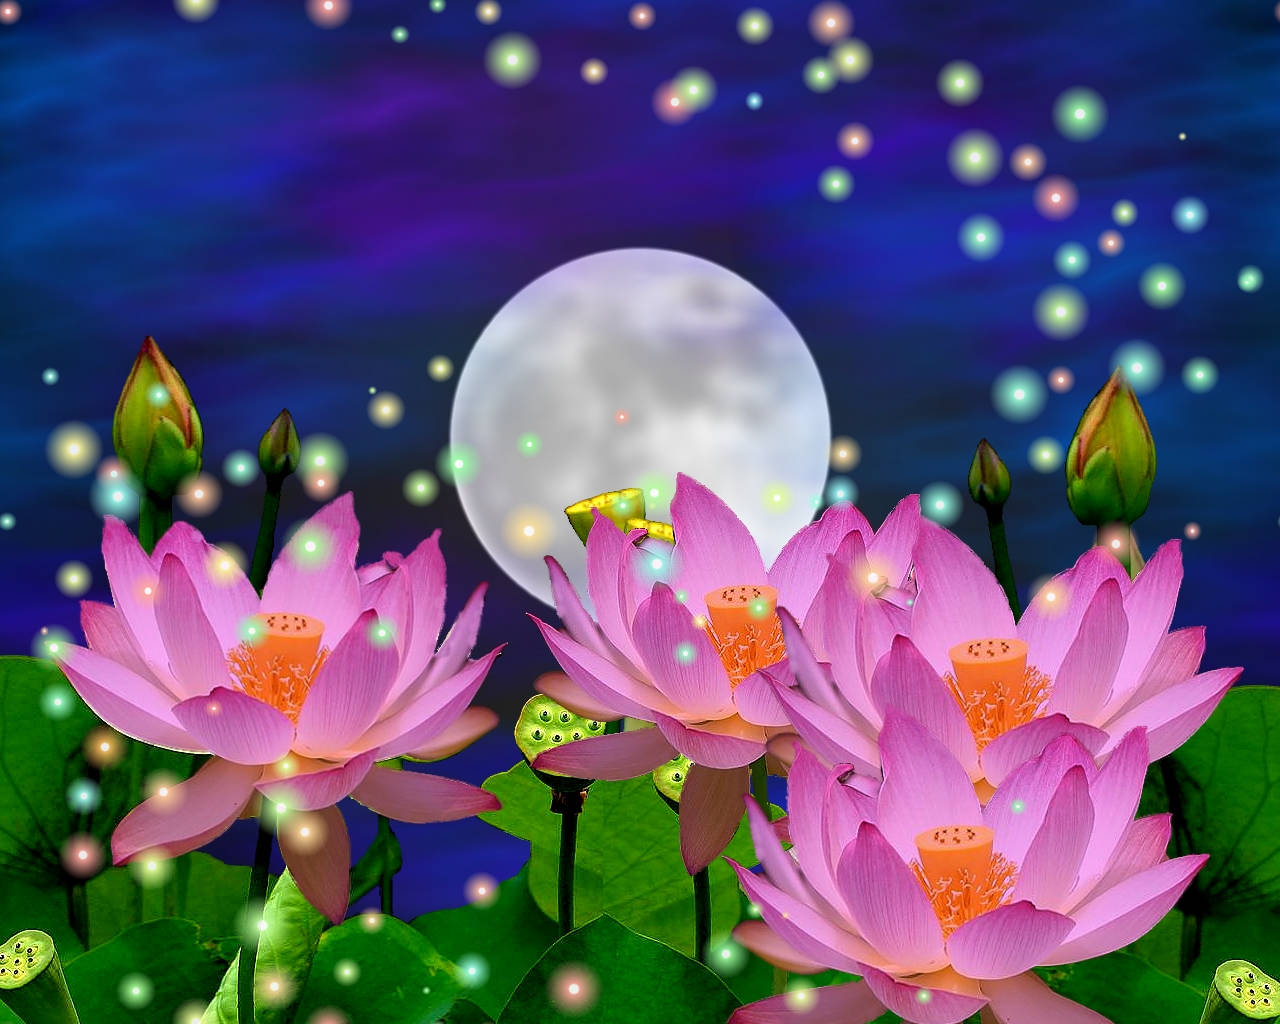 Lotus Flowers And The Moon